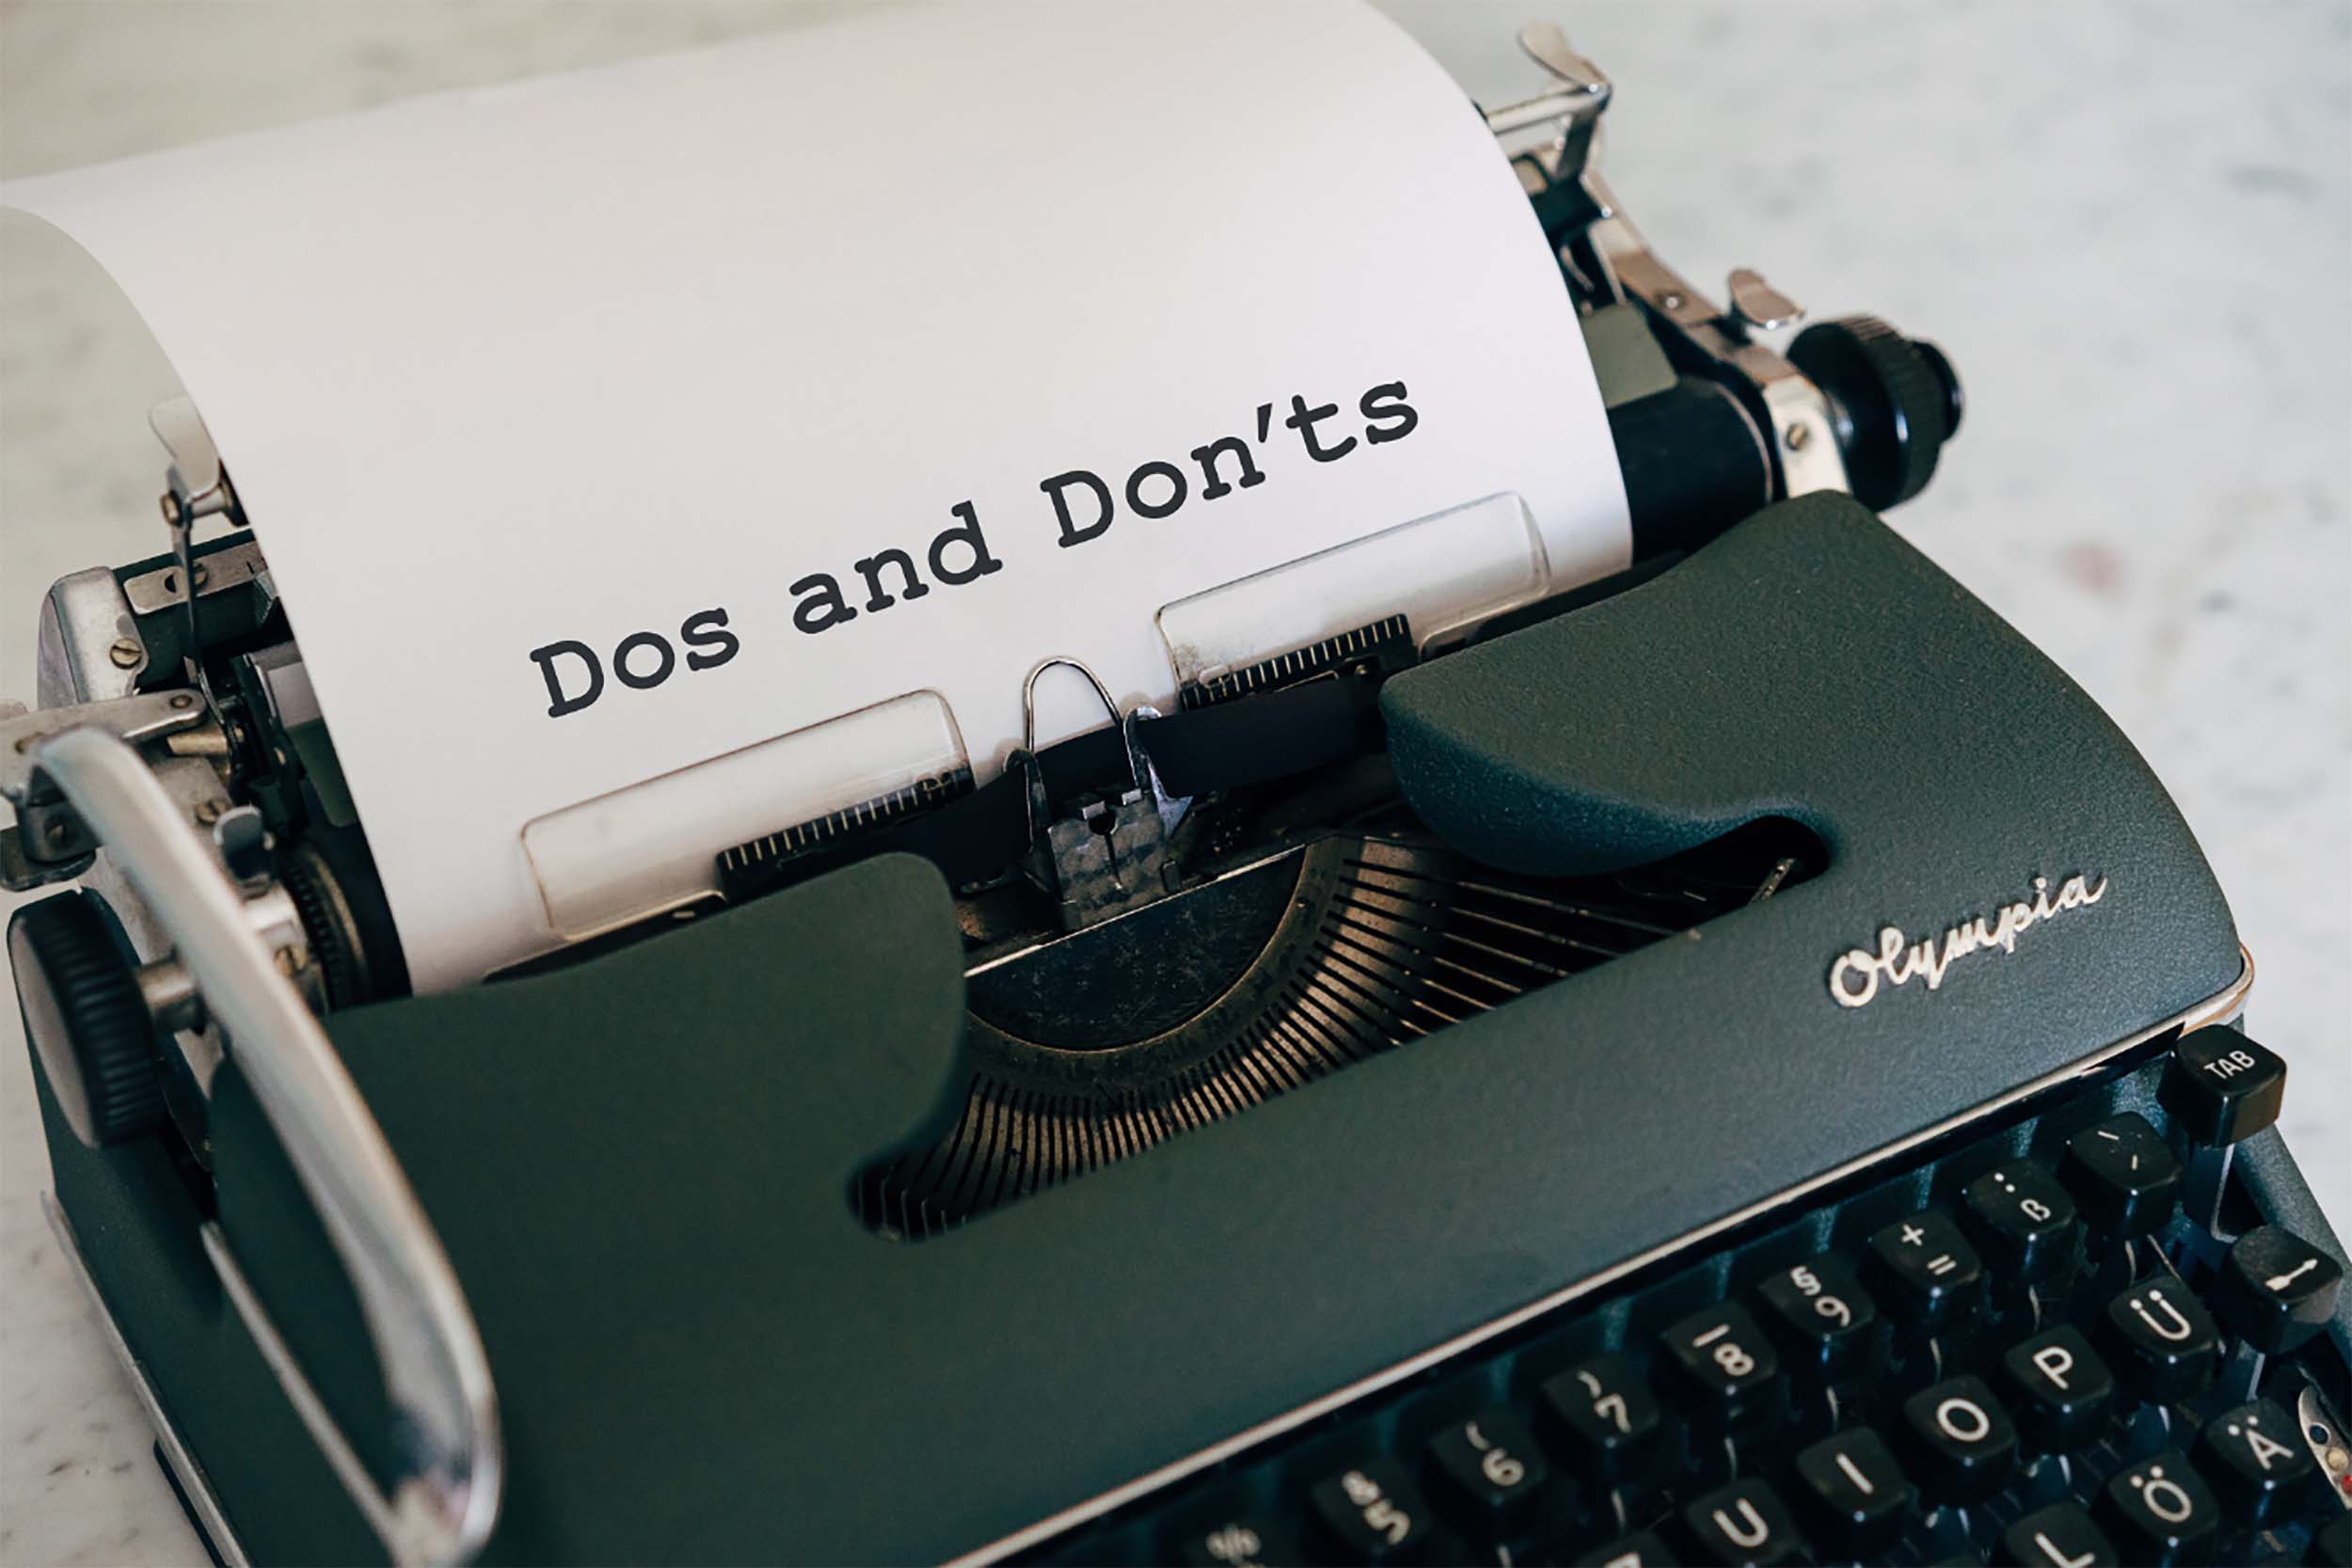 Typewriter with Do’s and Don’ts title typed out on a piece of paper